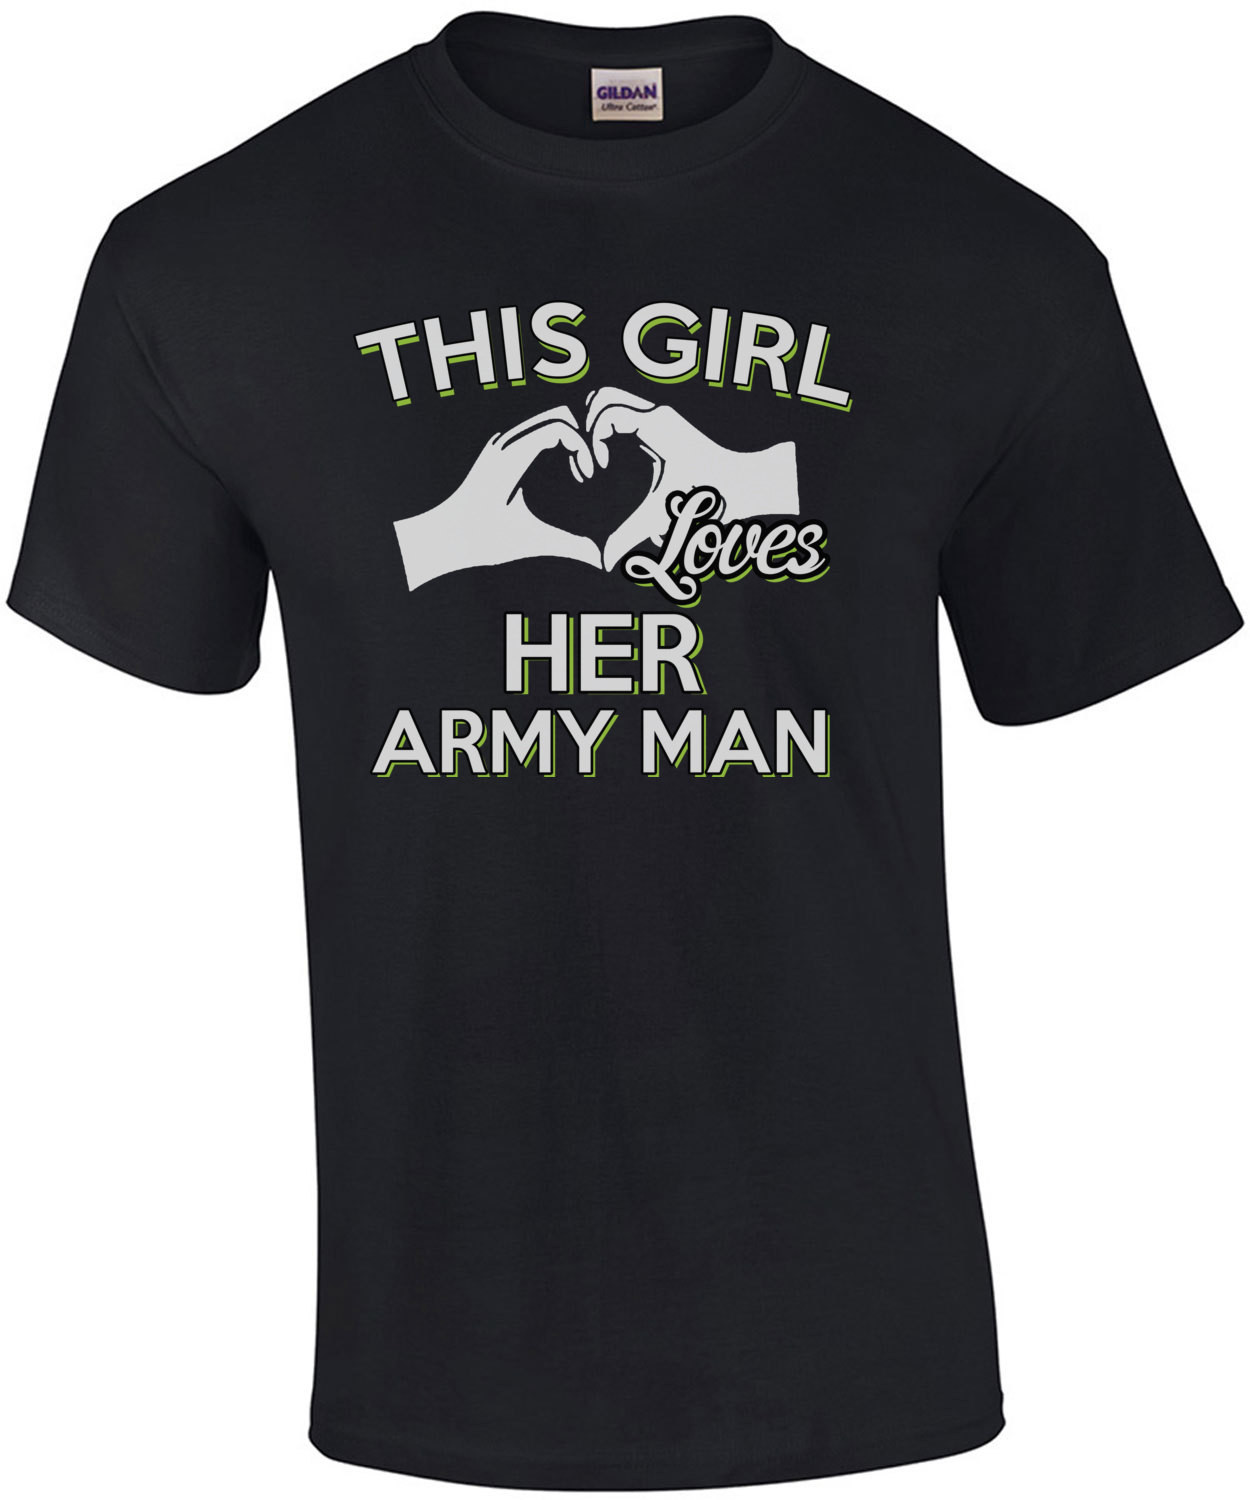 This Girl Loves Her Army Man T-Shirt